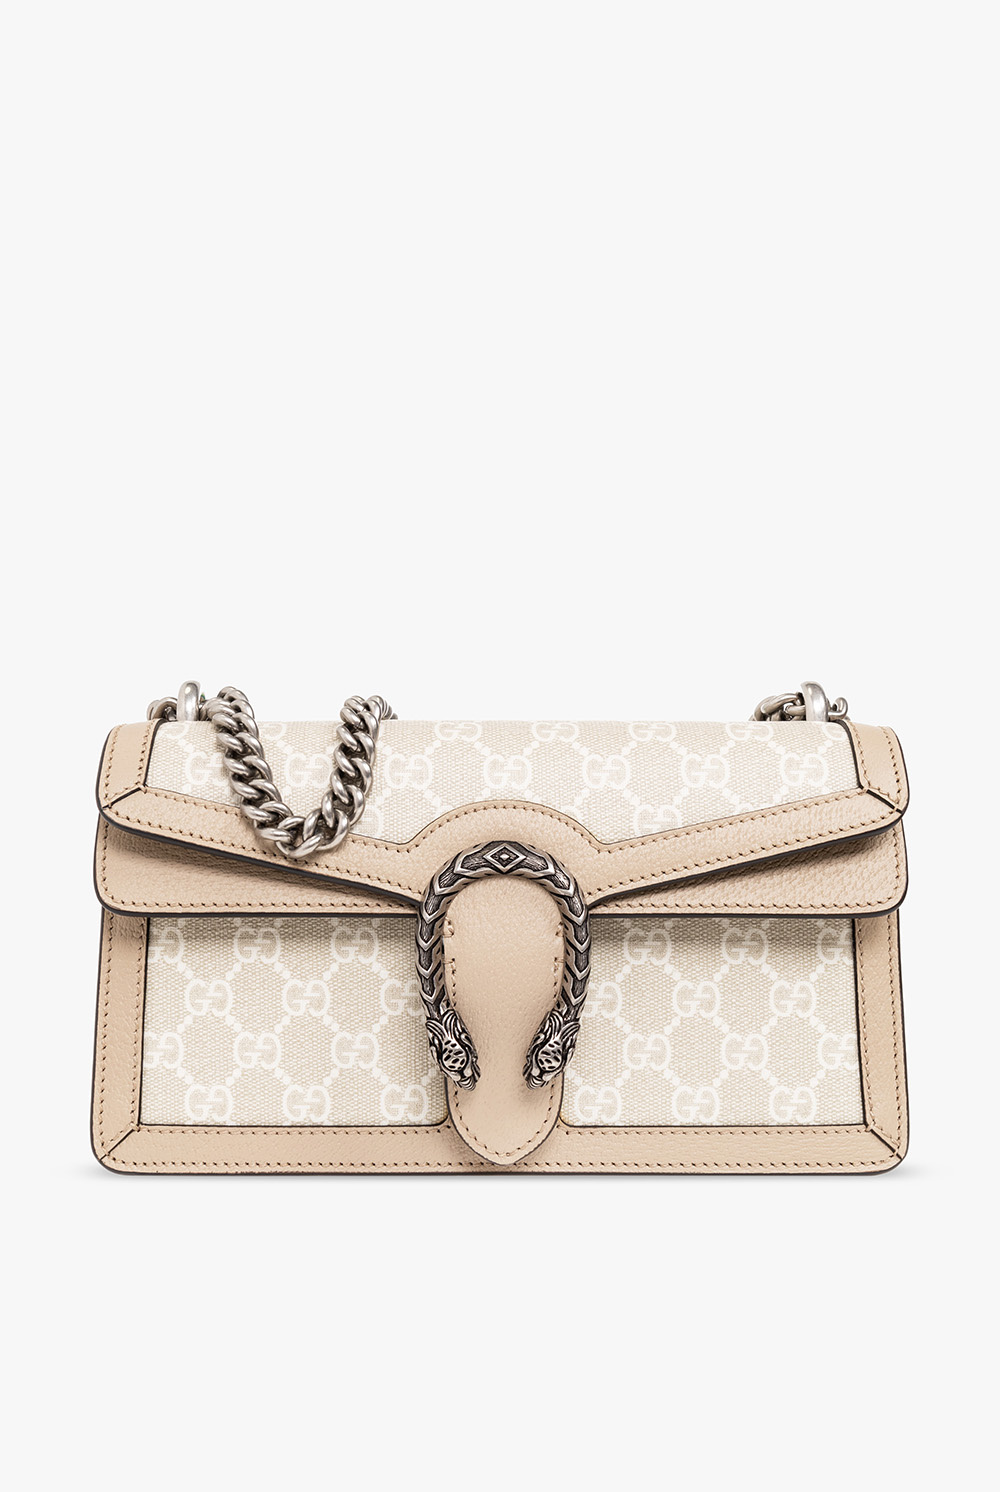 Gucci Dionysus Small Shoulder Bag in White